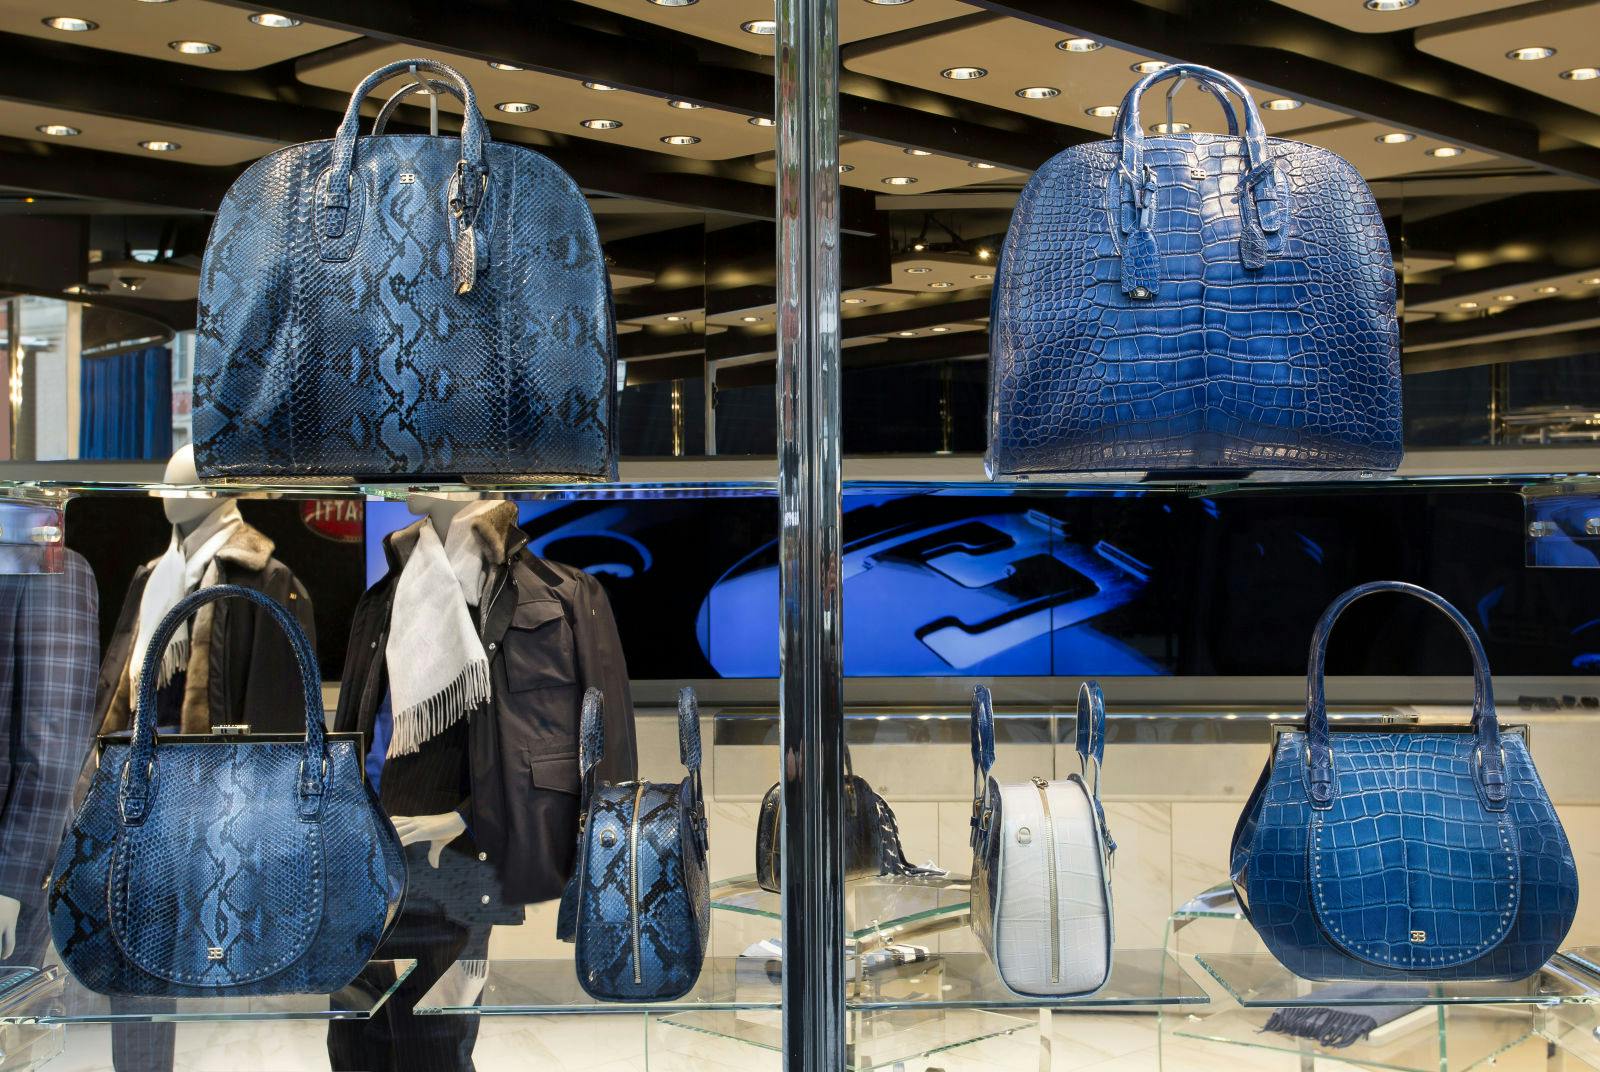 Inspired by the famous horseshoe grill shape of all of the Bugatti cars, the Bugatti signature bag is the star of the Bugatti boutique window displays.